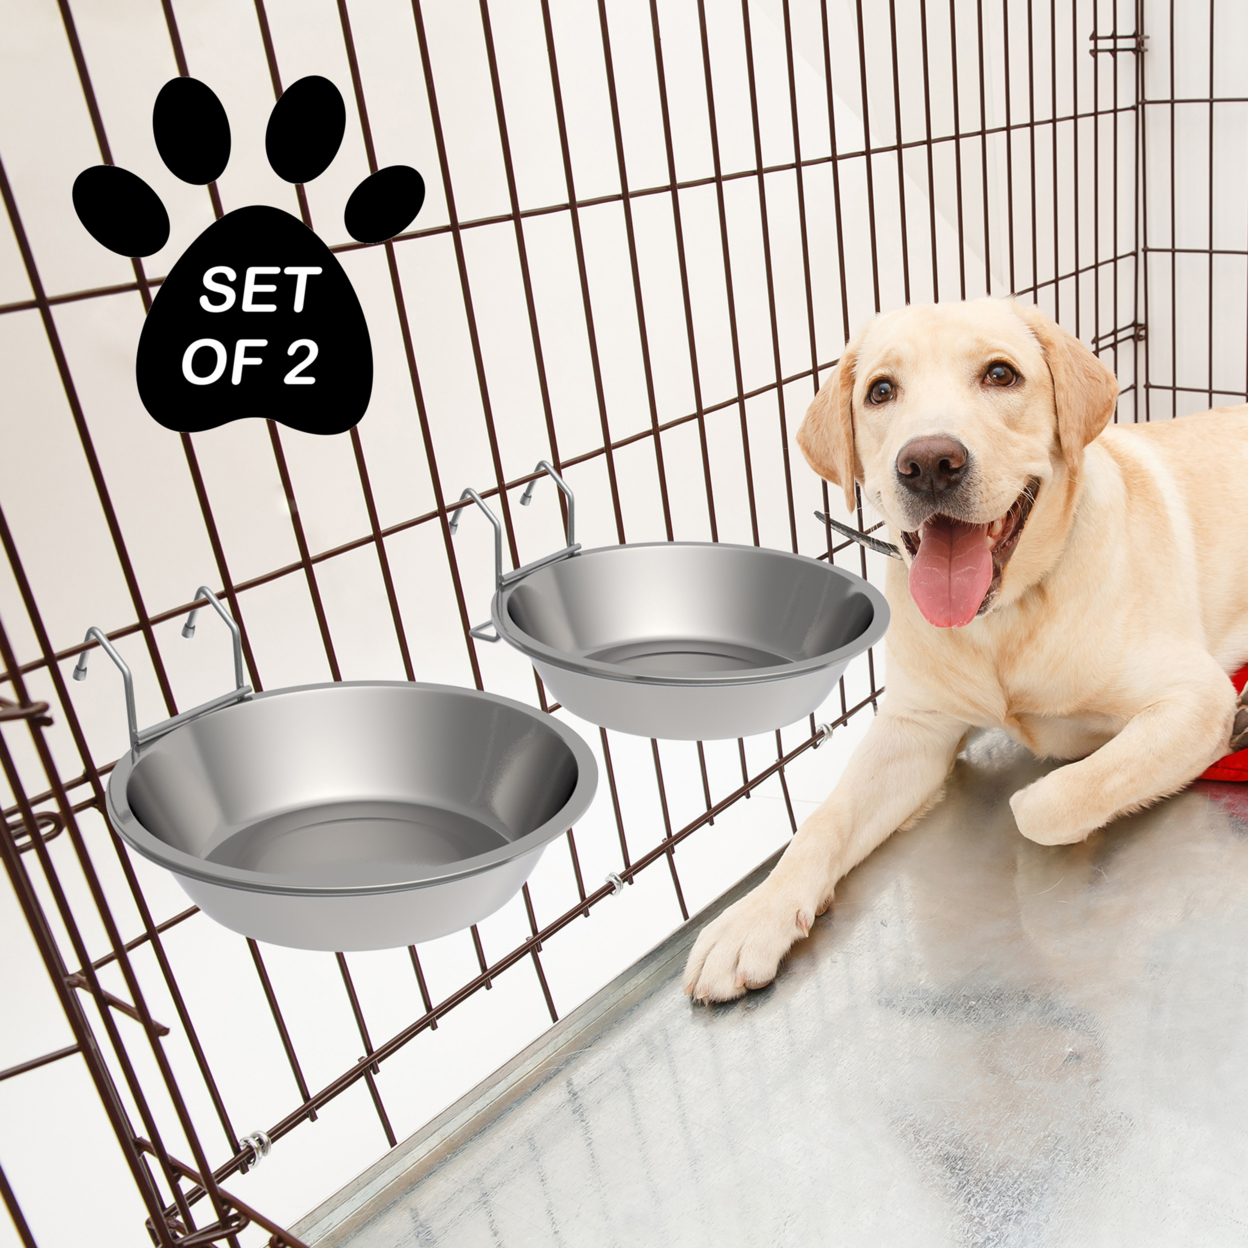 Stainless-Steel Hanging Pet Bowls For Dogs And Cats-Cage, Kennel, And Crate Large Feeder Dishes For Food And Water Set Of 2